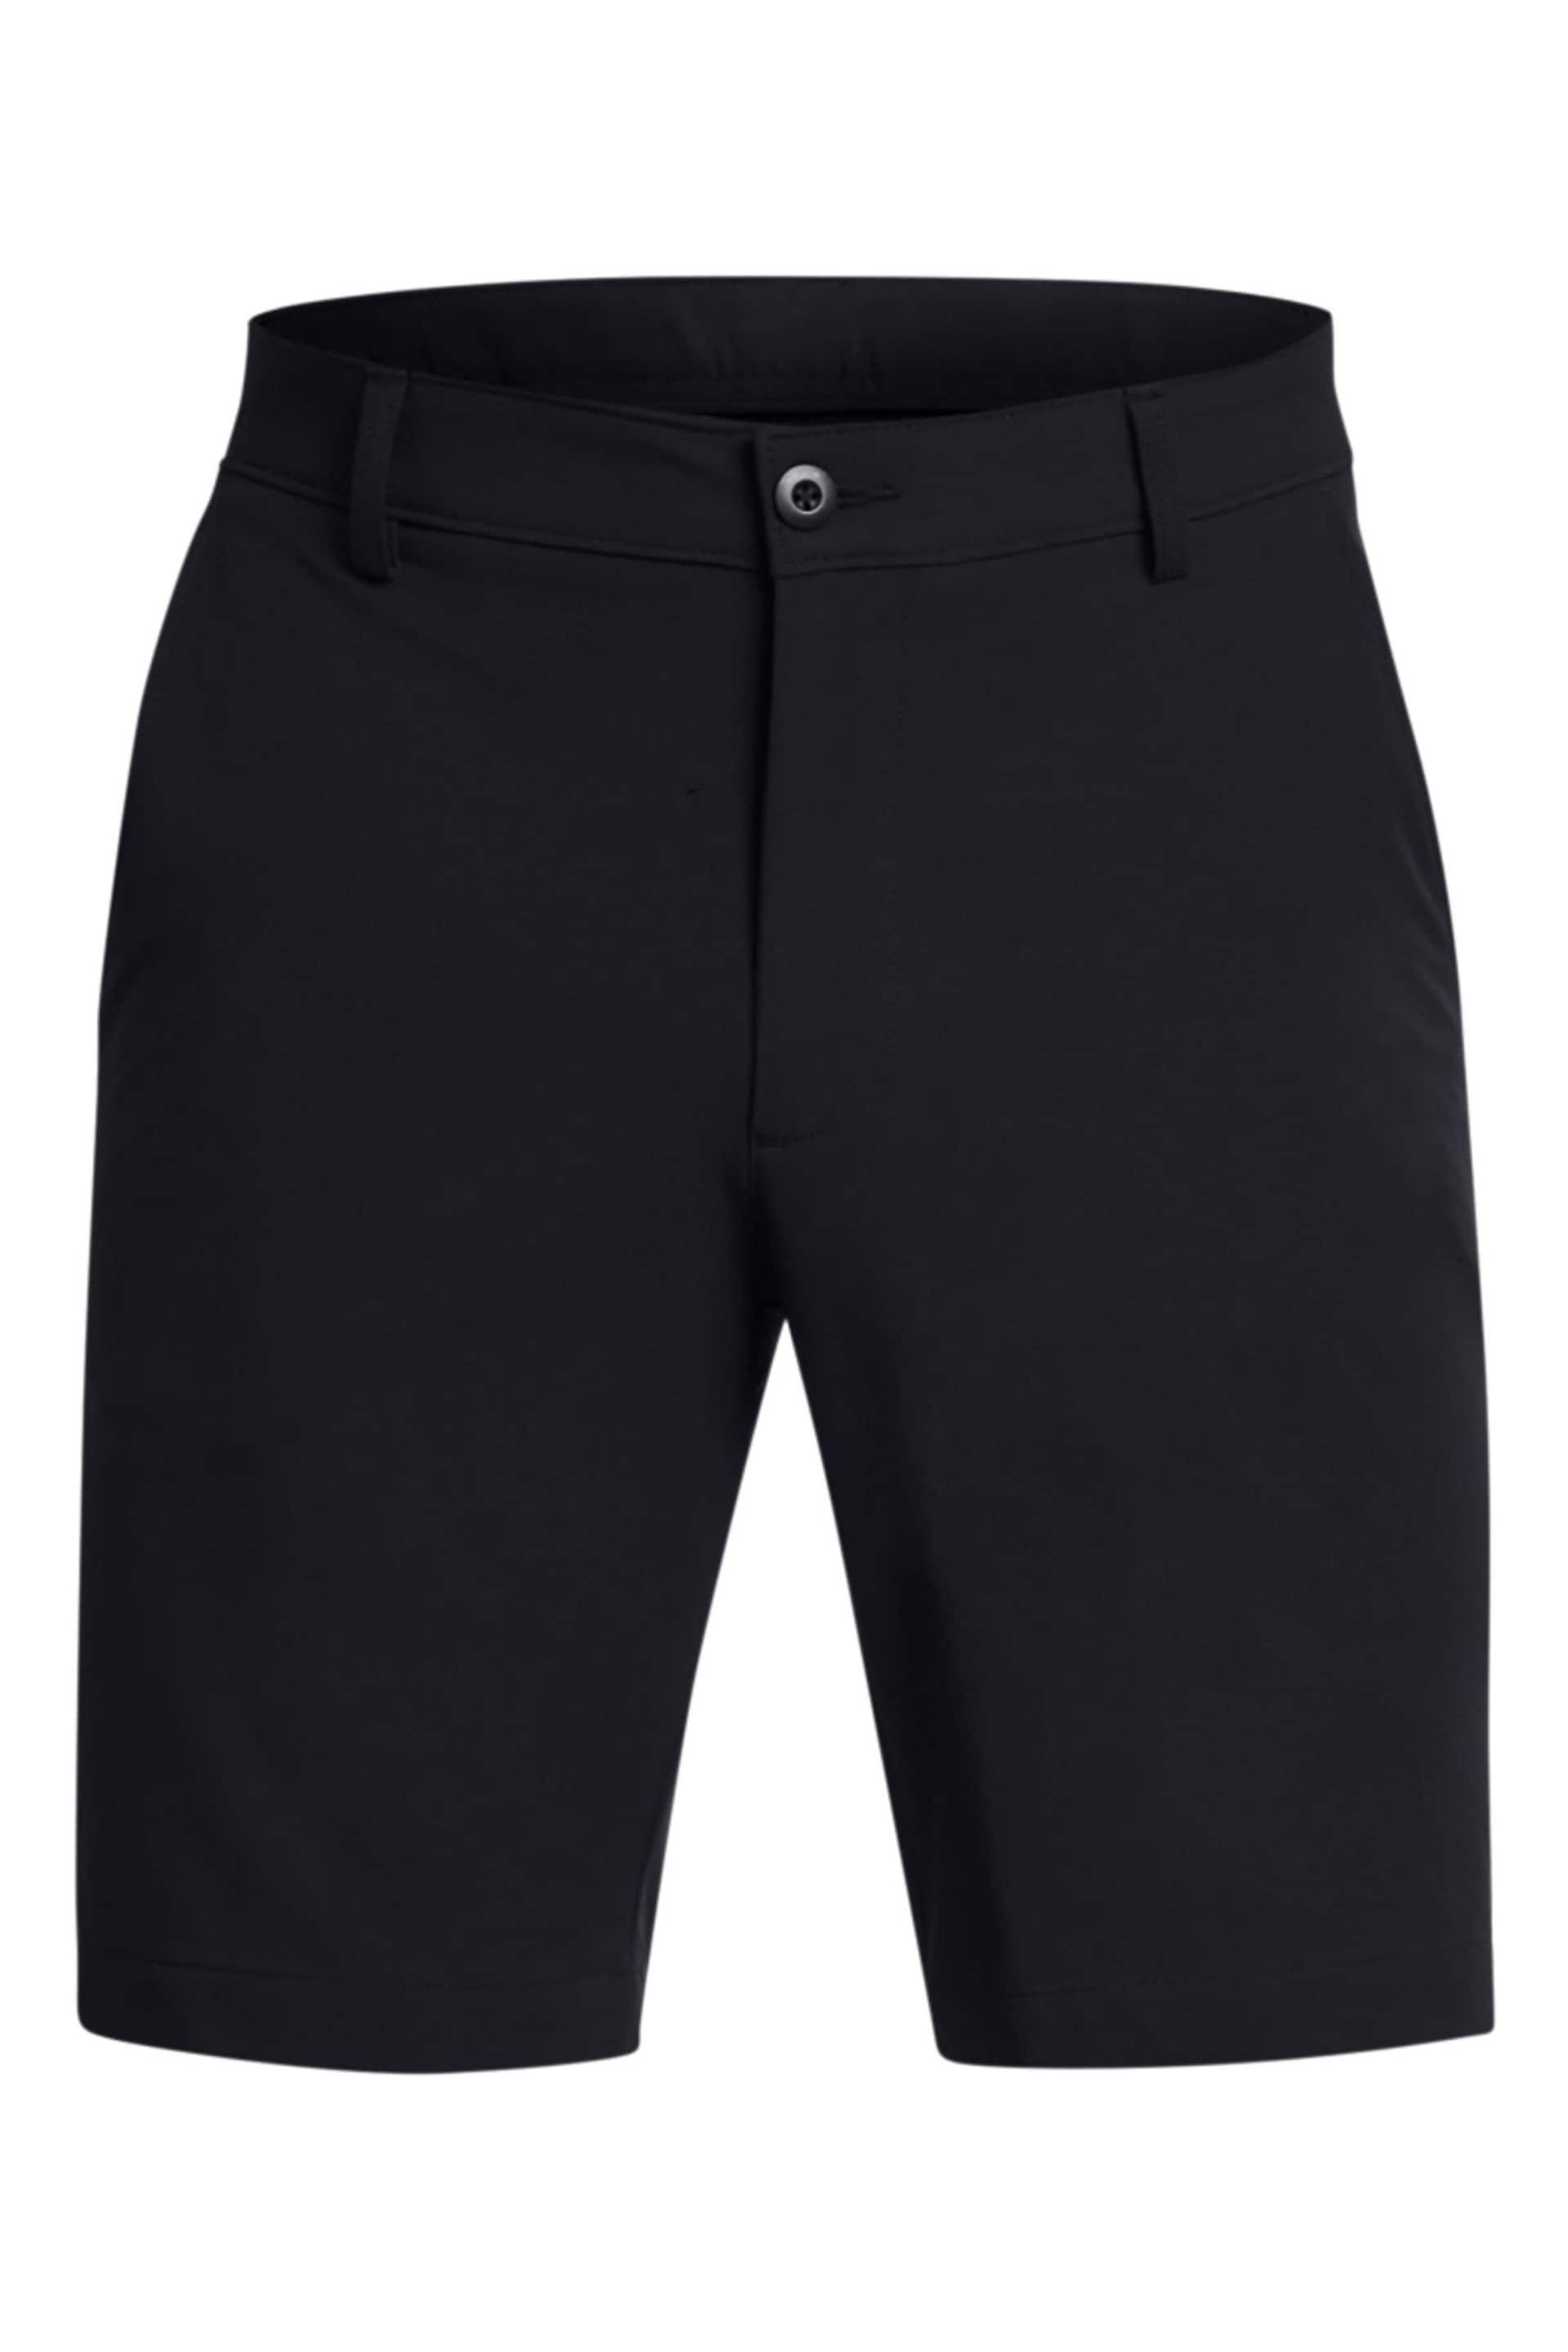 Under Armour Black Tech Taper Shorts - Image 5 of 6